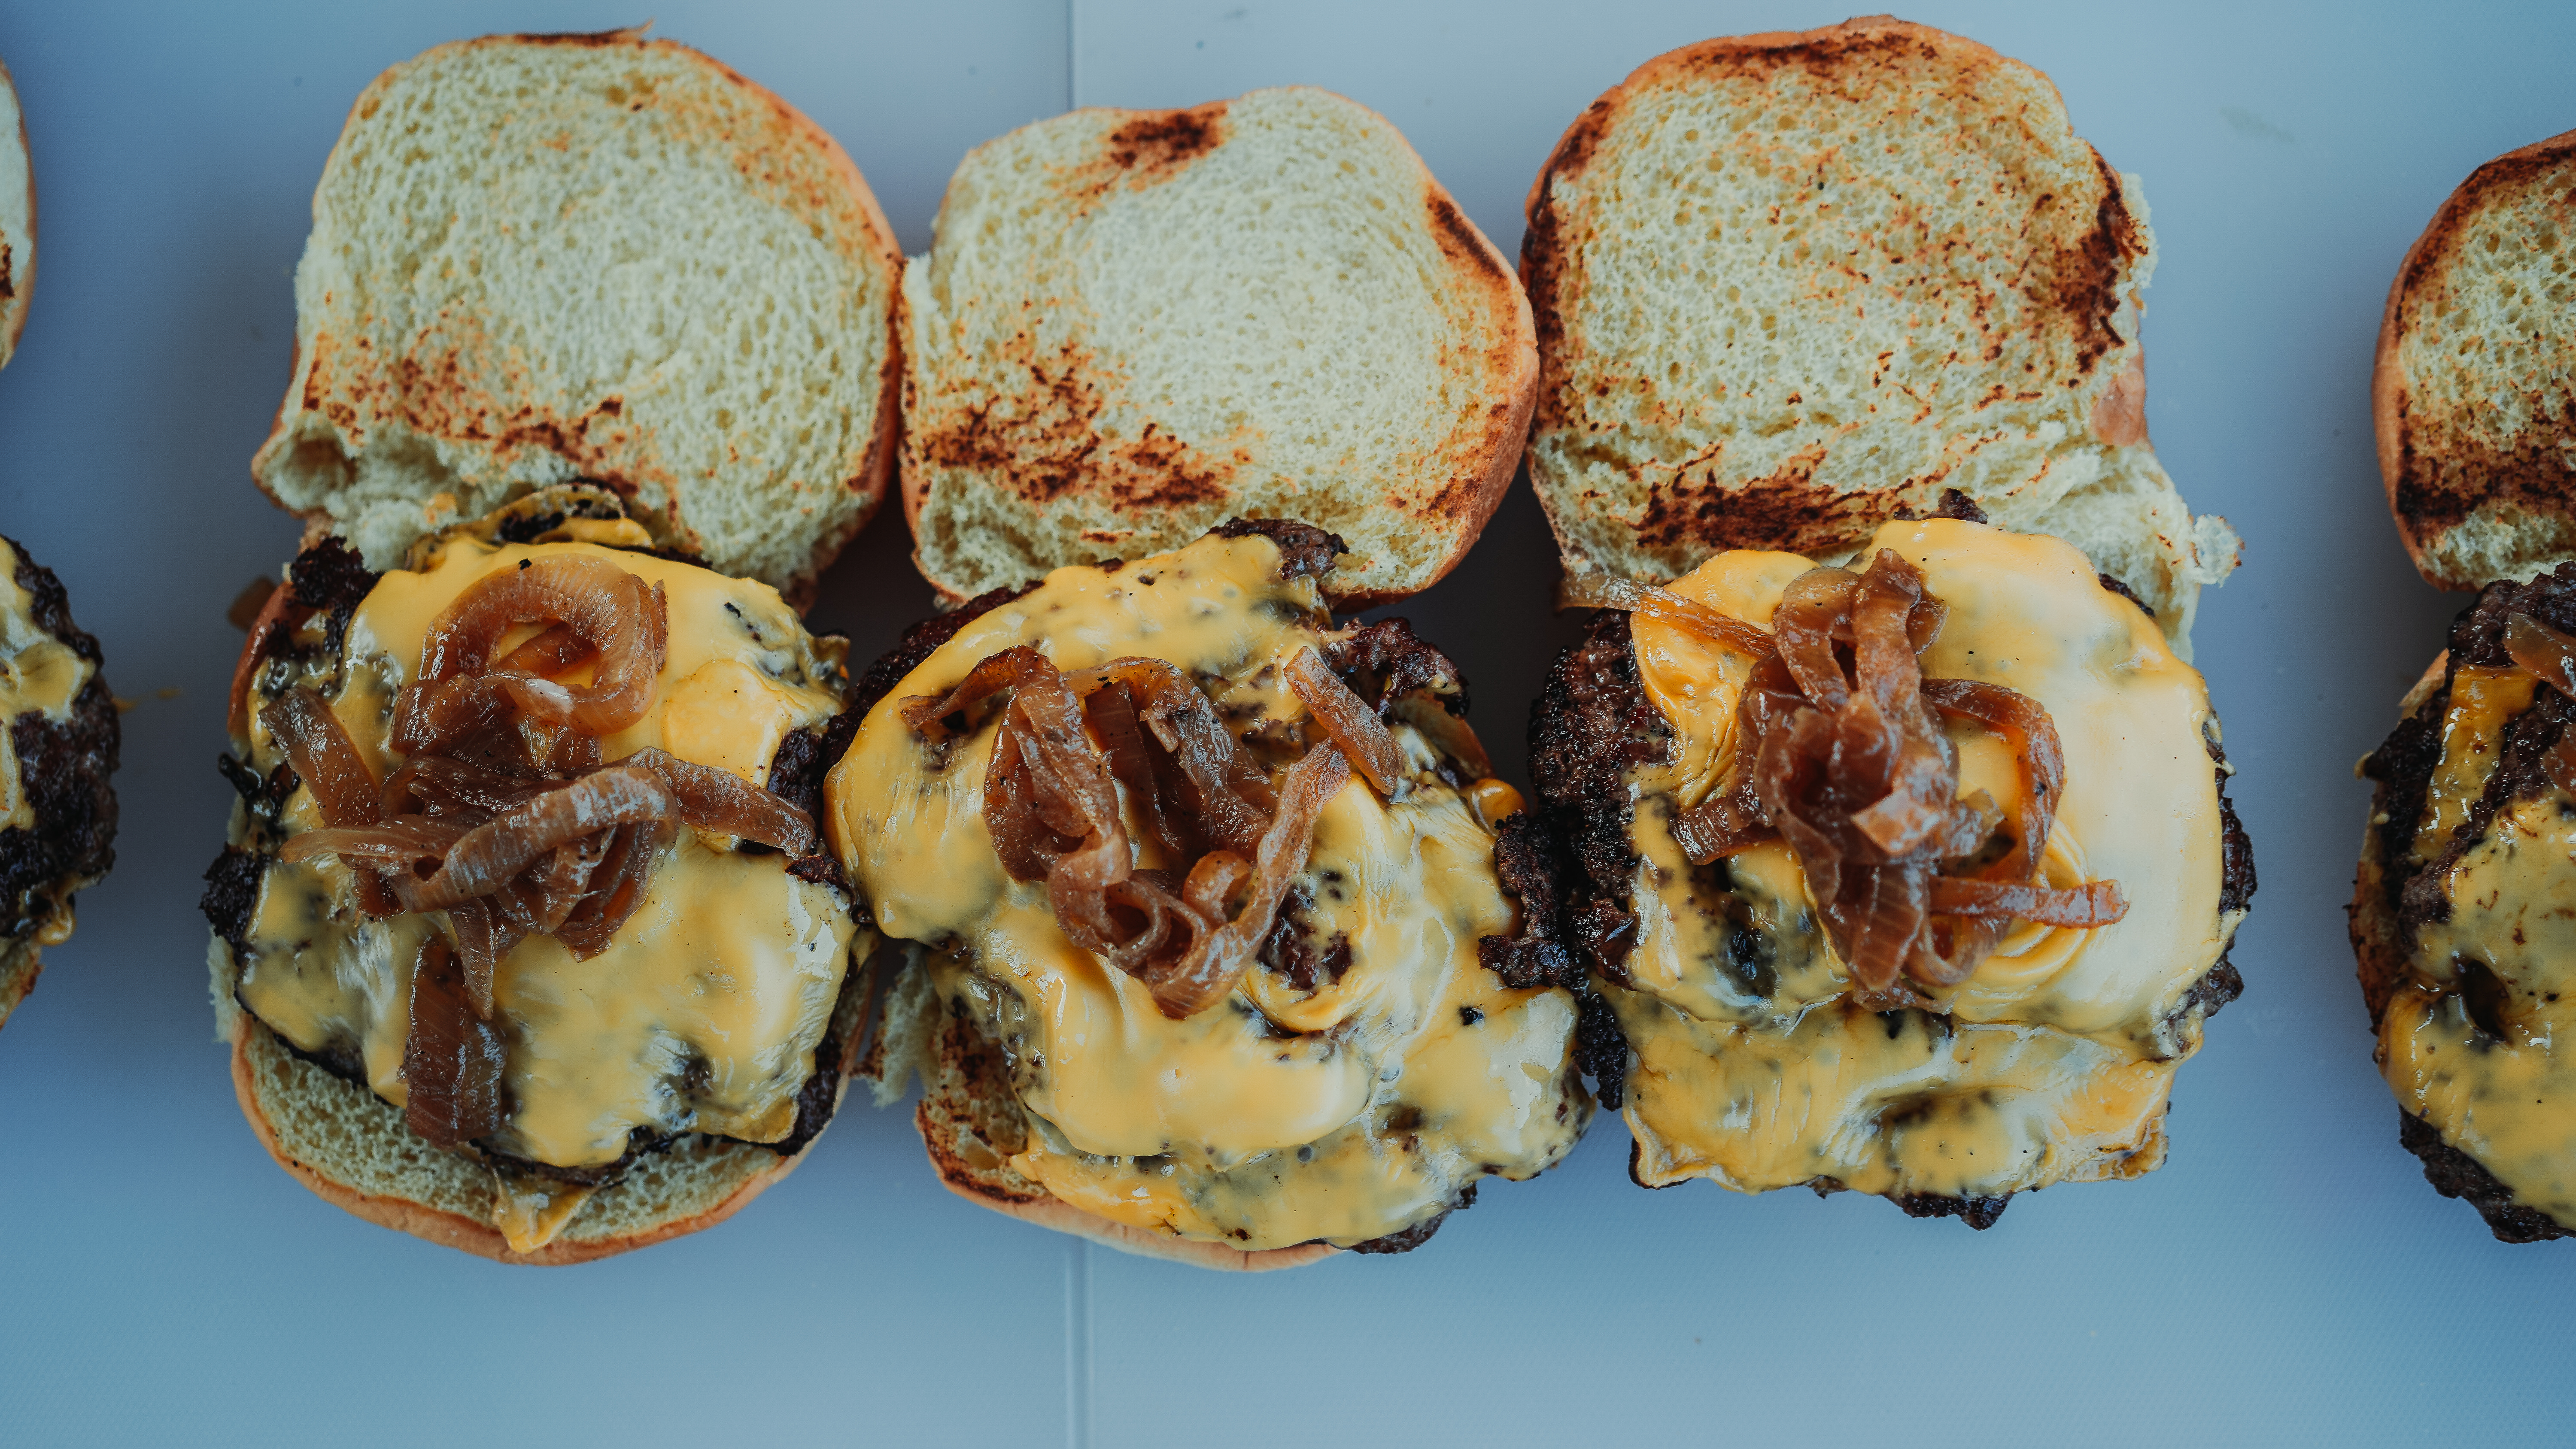 three smash burgers with cheese with caramelized onions from Trill Burger.